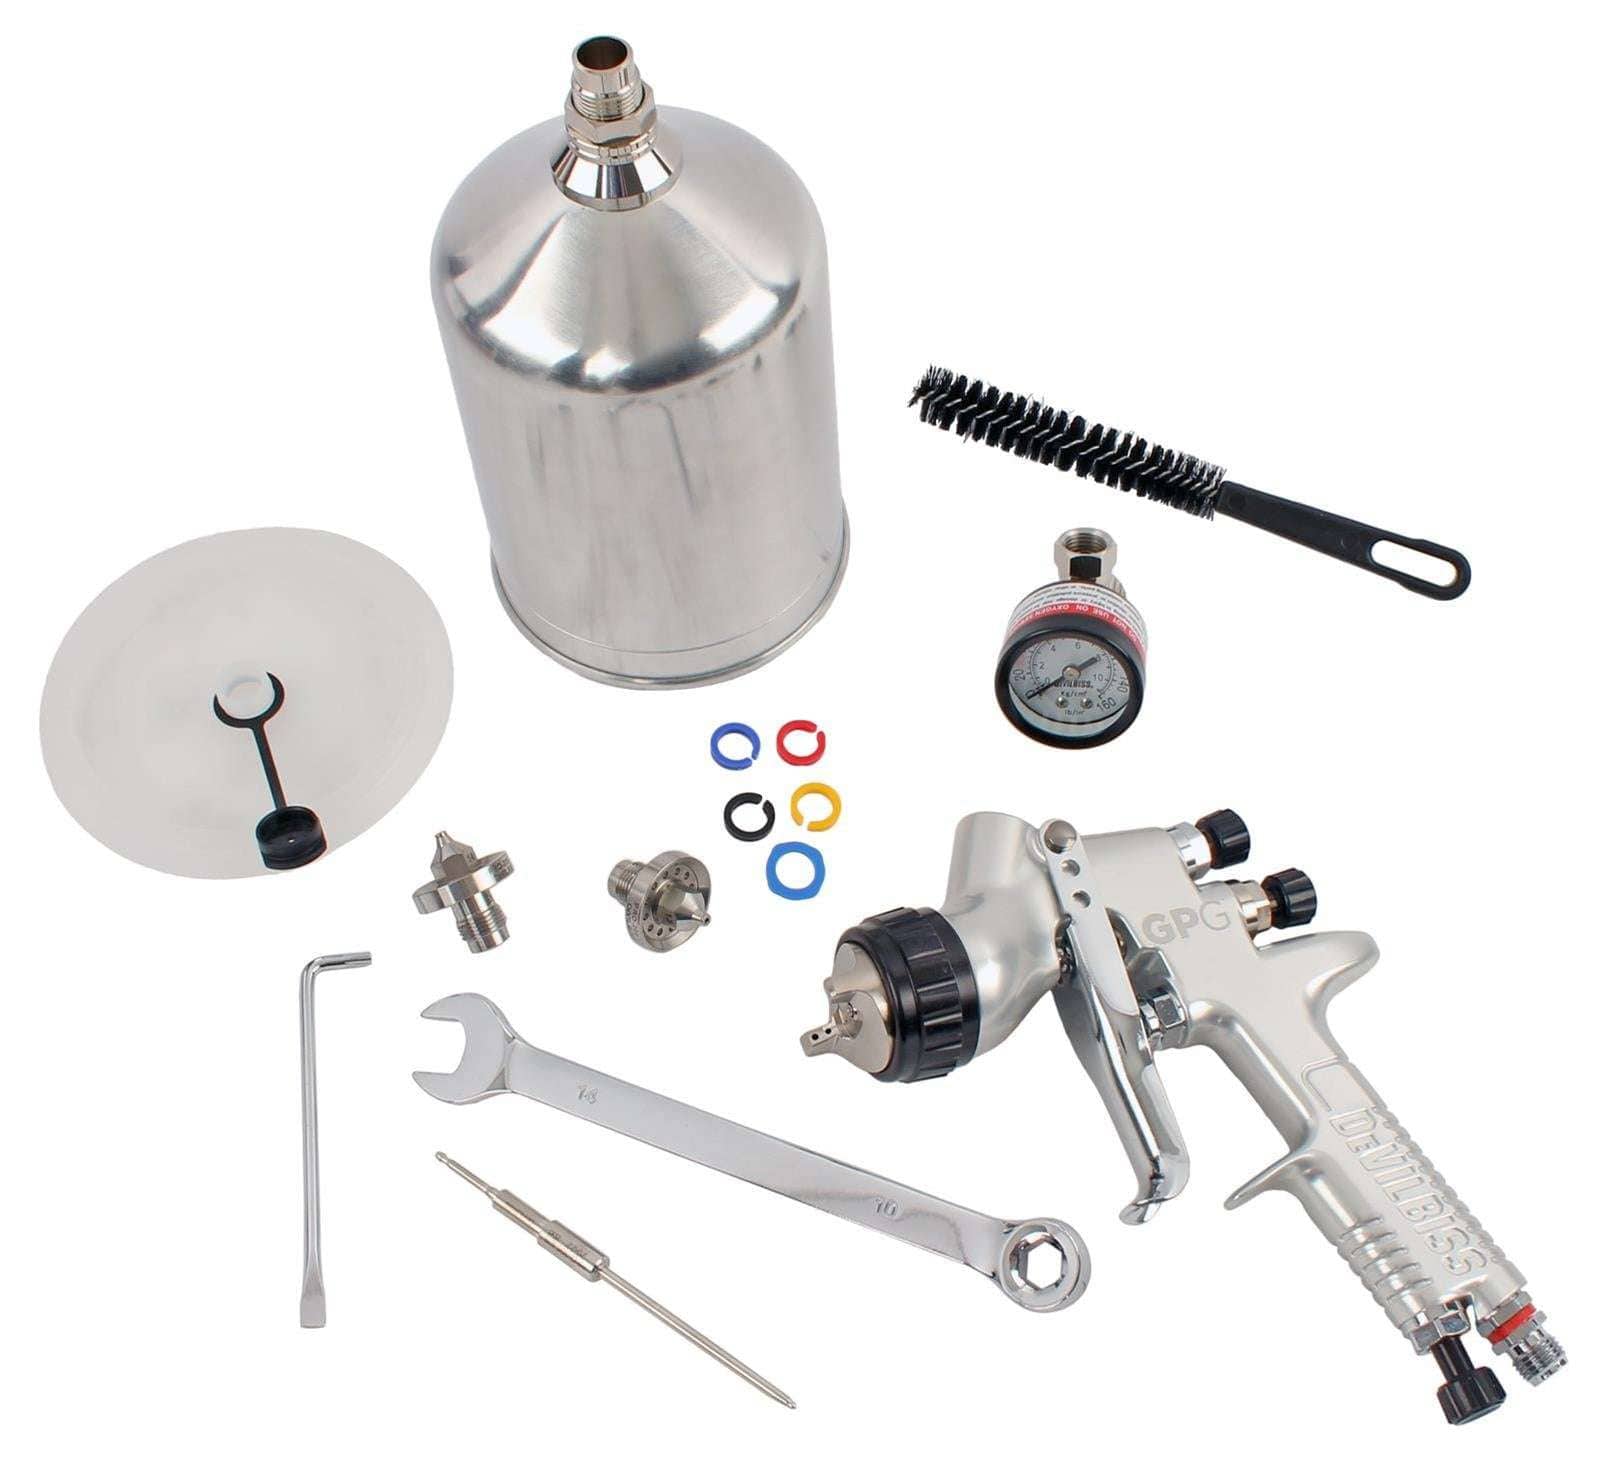 DevilBiss GPG 905012 HVLP Spray Gun with Cup, 1.3,1.5,1.8mm Nozzles